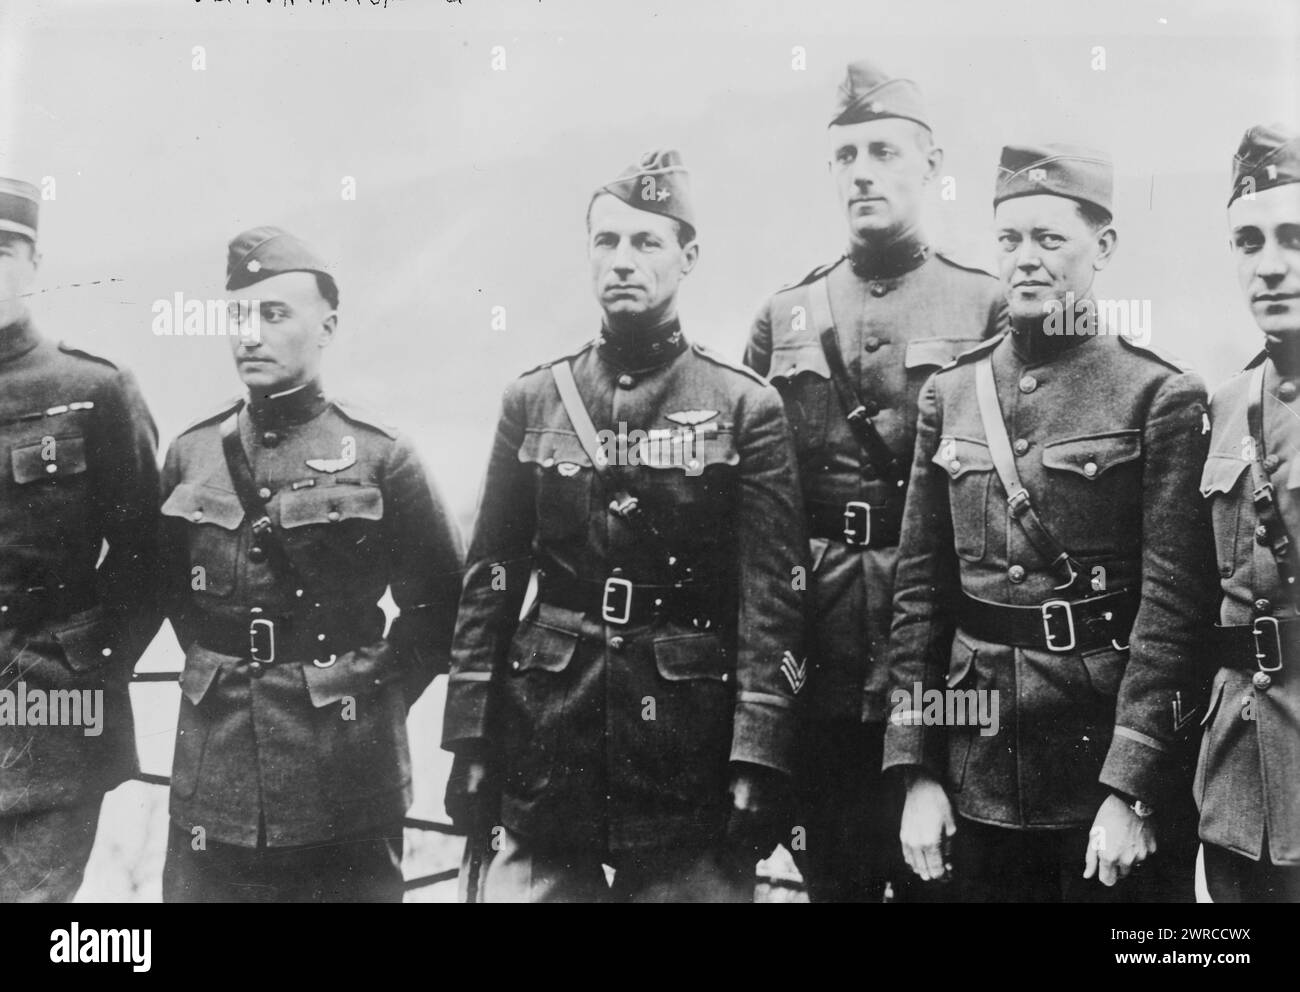 Gen. Wm. Mitchell & staff, Photograph shows Brigadier General William Mitchell, chief of Air Service, and staff. From left to right: Capt. R. Vallois, Lieutenant Colonel Lewis Hyde Brereton (1890-1967), Brigadier General William Mitchell, Major Ira Beaman Joralemon (1884-1975), Captain O. E. Marrel, First Lieutenant E. F, Schwab in Dierdorf, Germany, January 11, 1919., 1919 Jan. 11, Glass negatives, 1 negative: glass Stock Photo